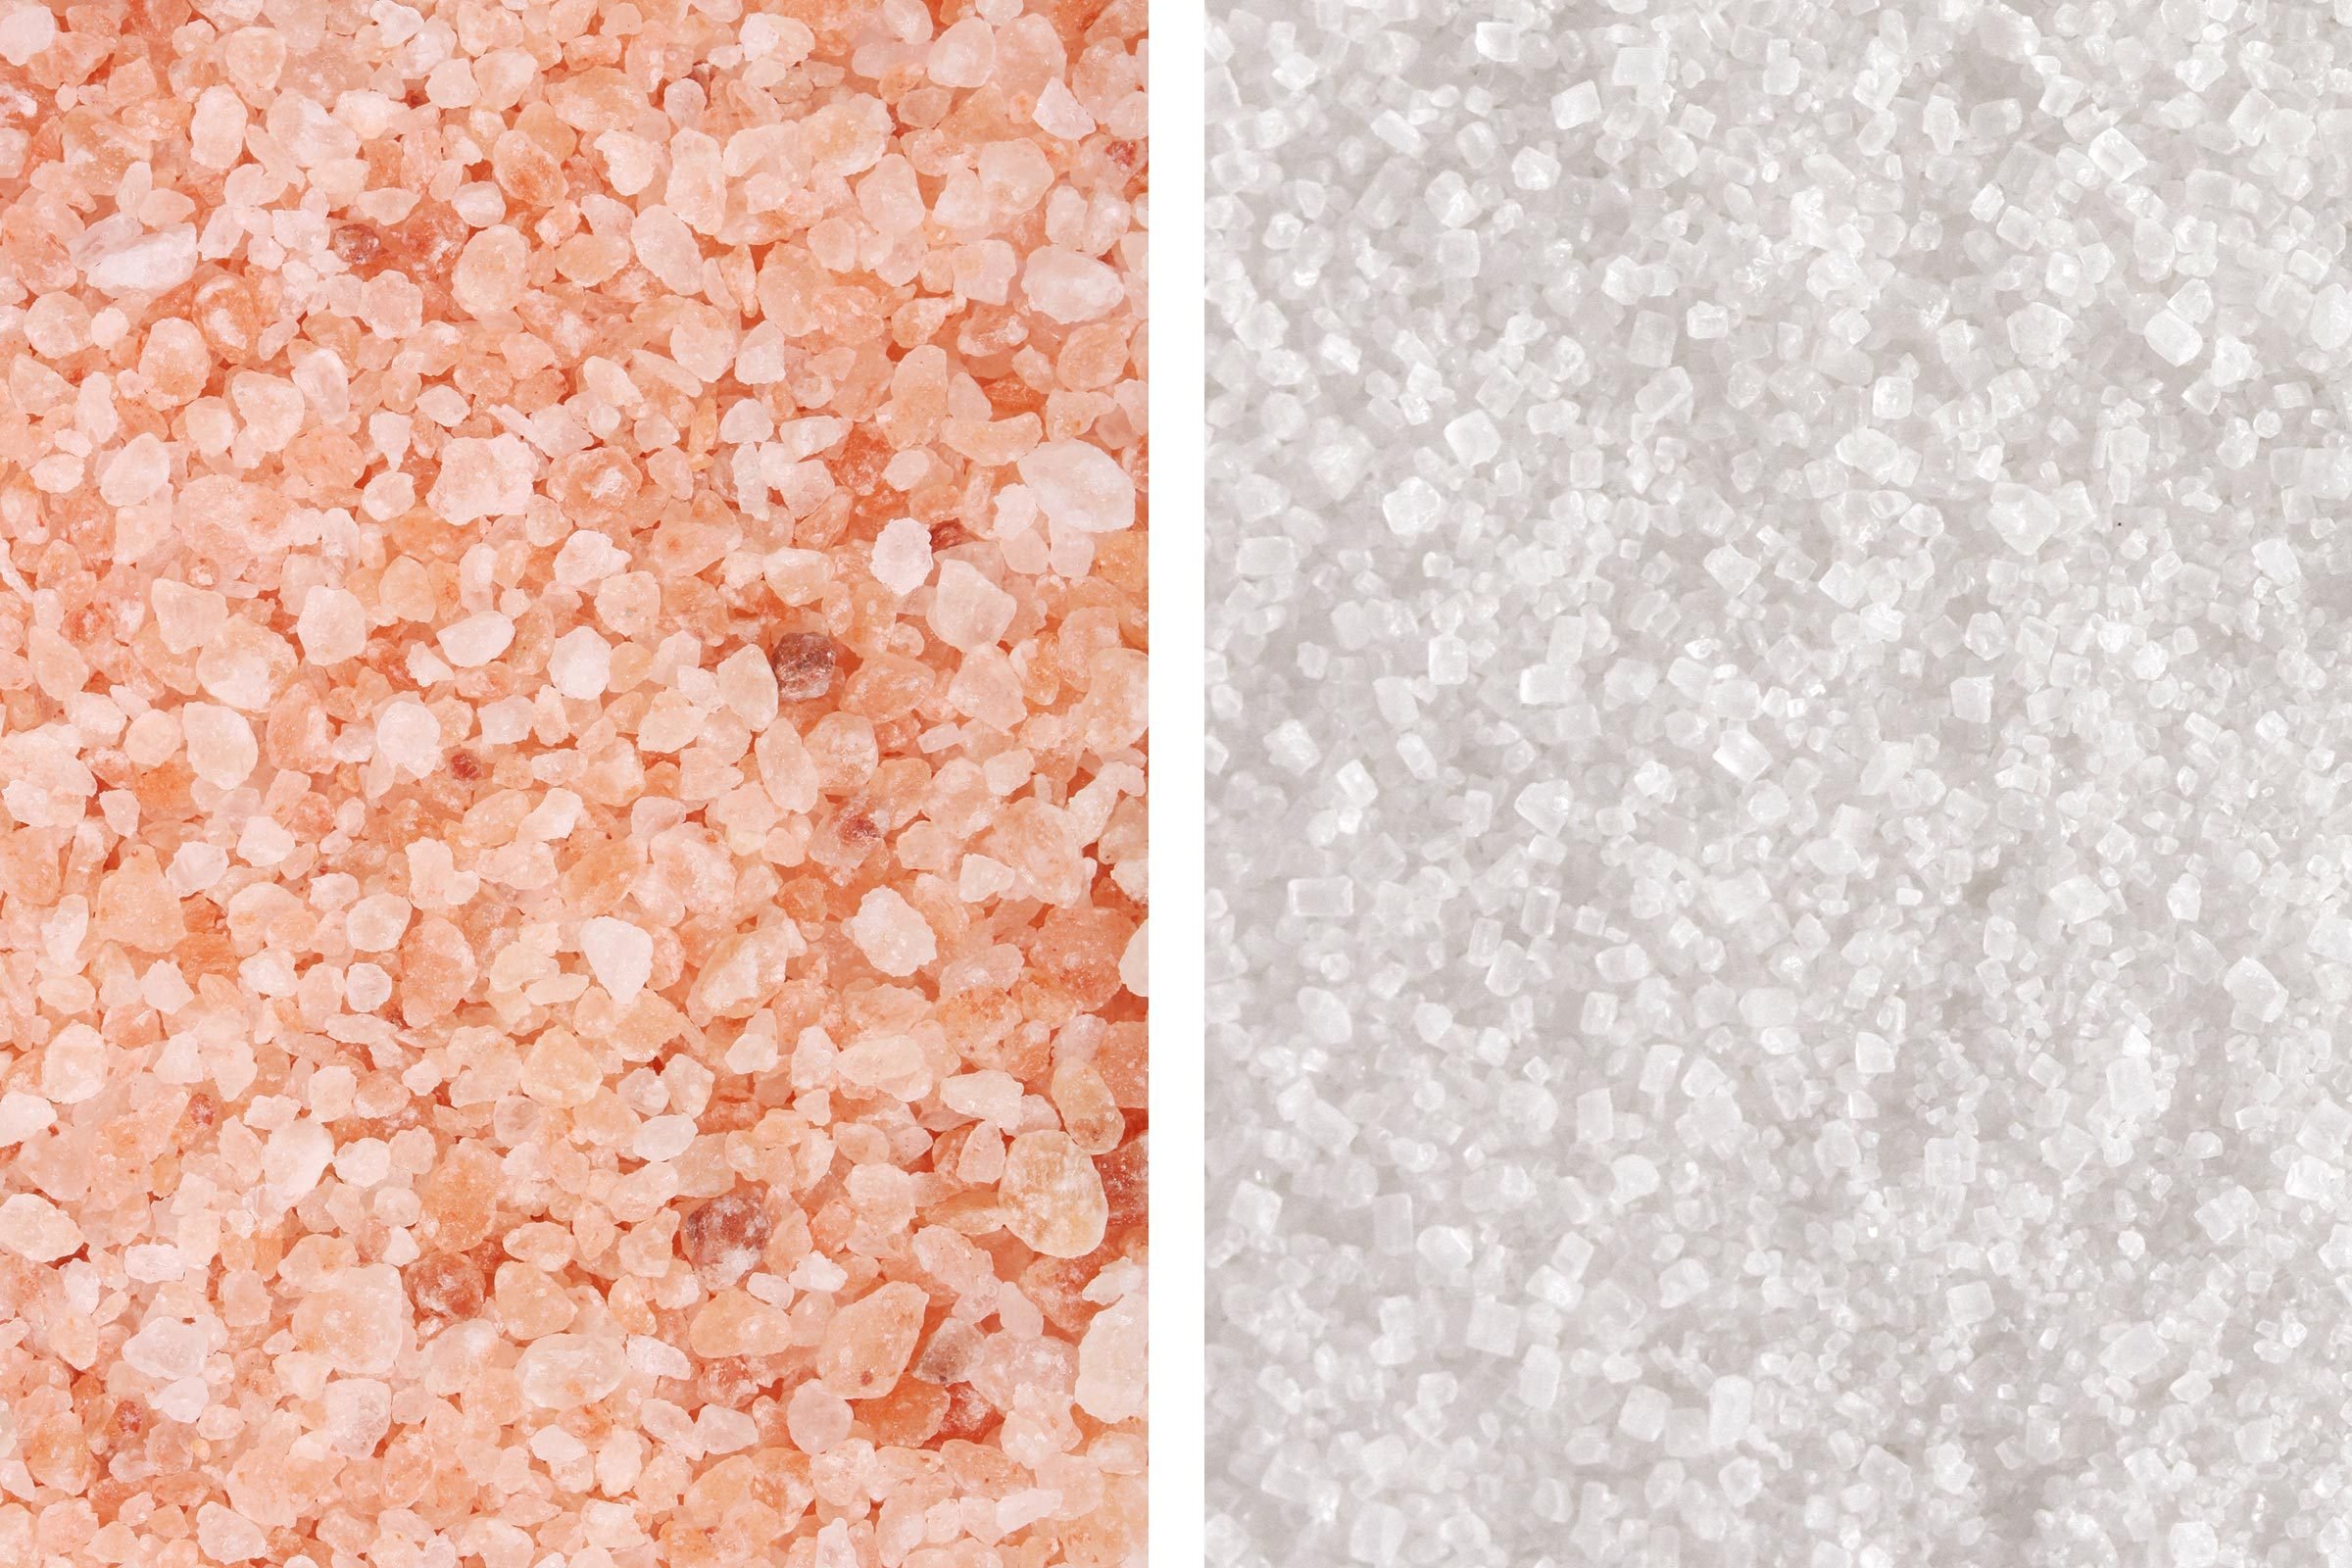 Pink Himalayan Salt vs. Sea Salt: Which Is Better for You?